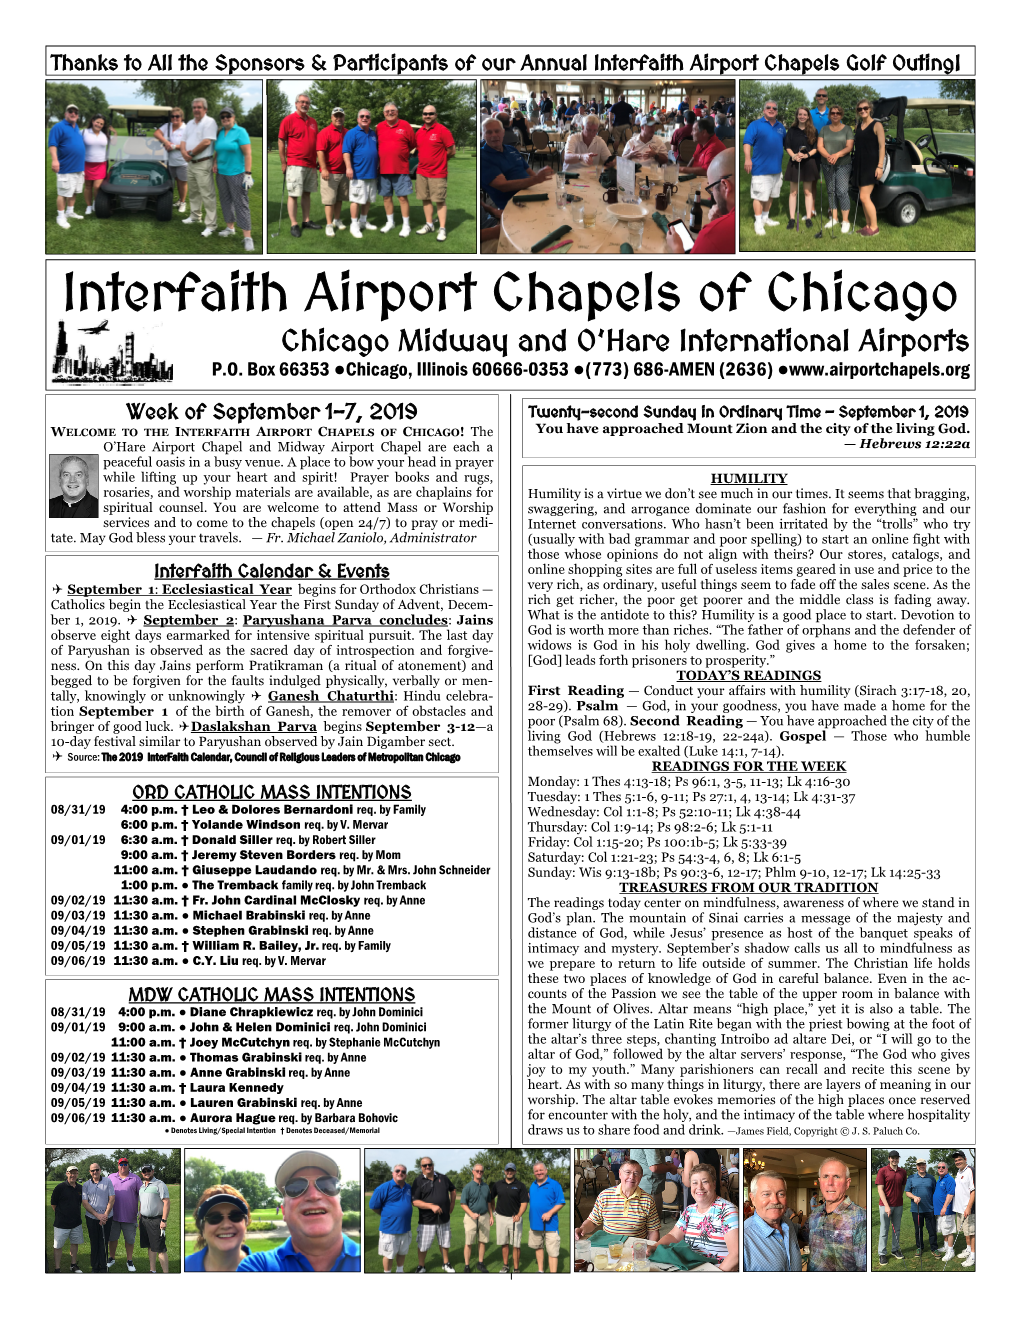 Interfaith Airport Chapels of Chicago Chicago Midway and O’Hare International Airports P.O